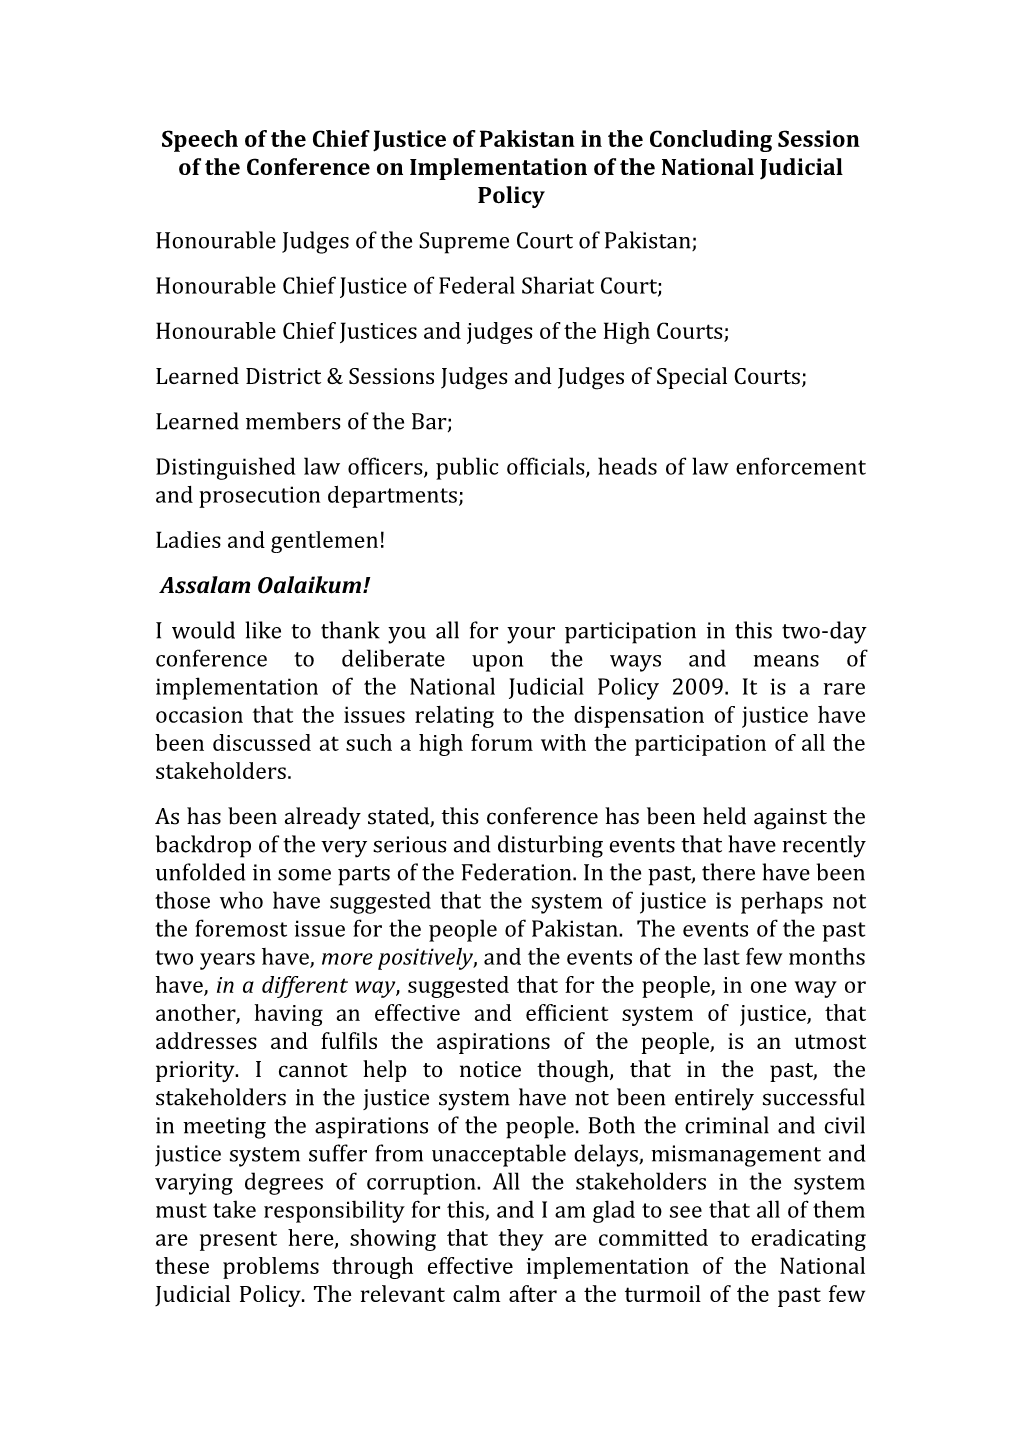 Speech of the Chief Justice of Pakistan in the Concluding Session of National Judicial Policy